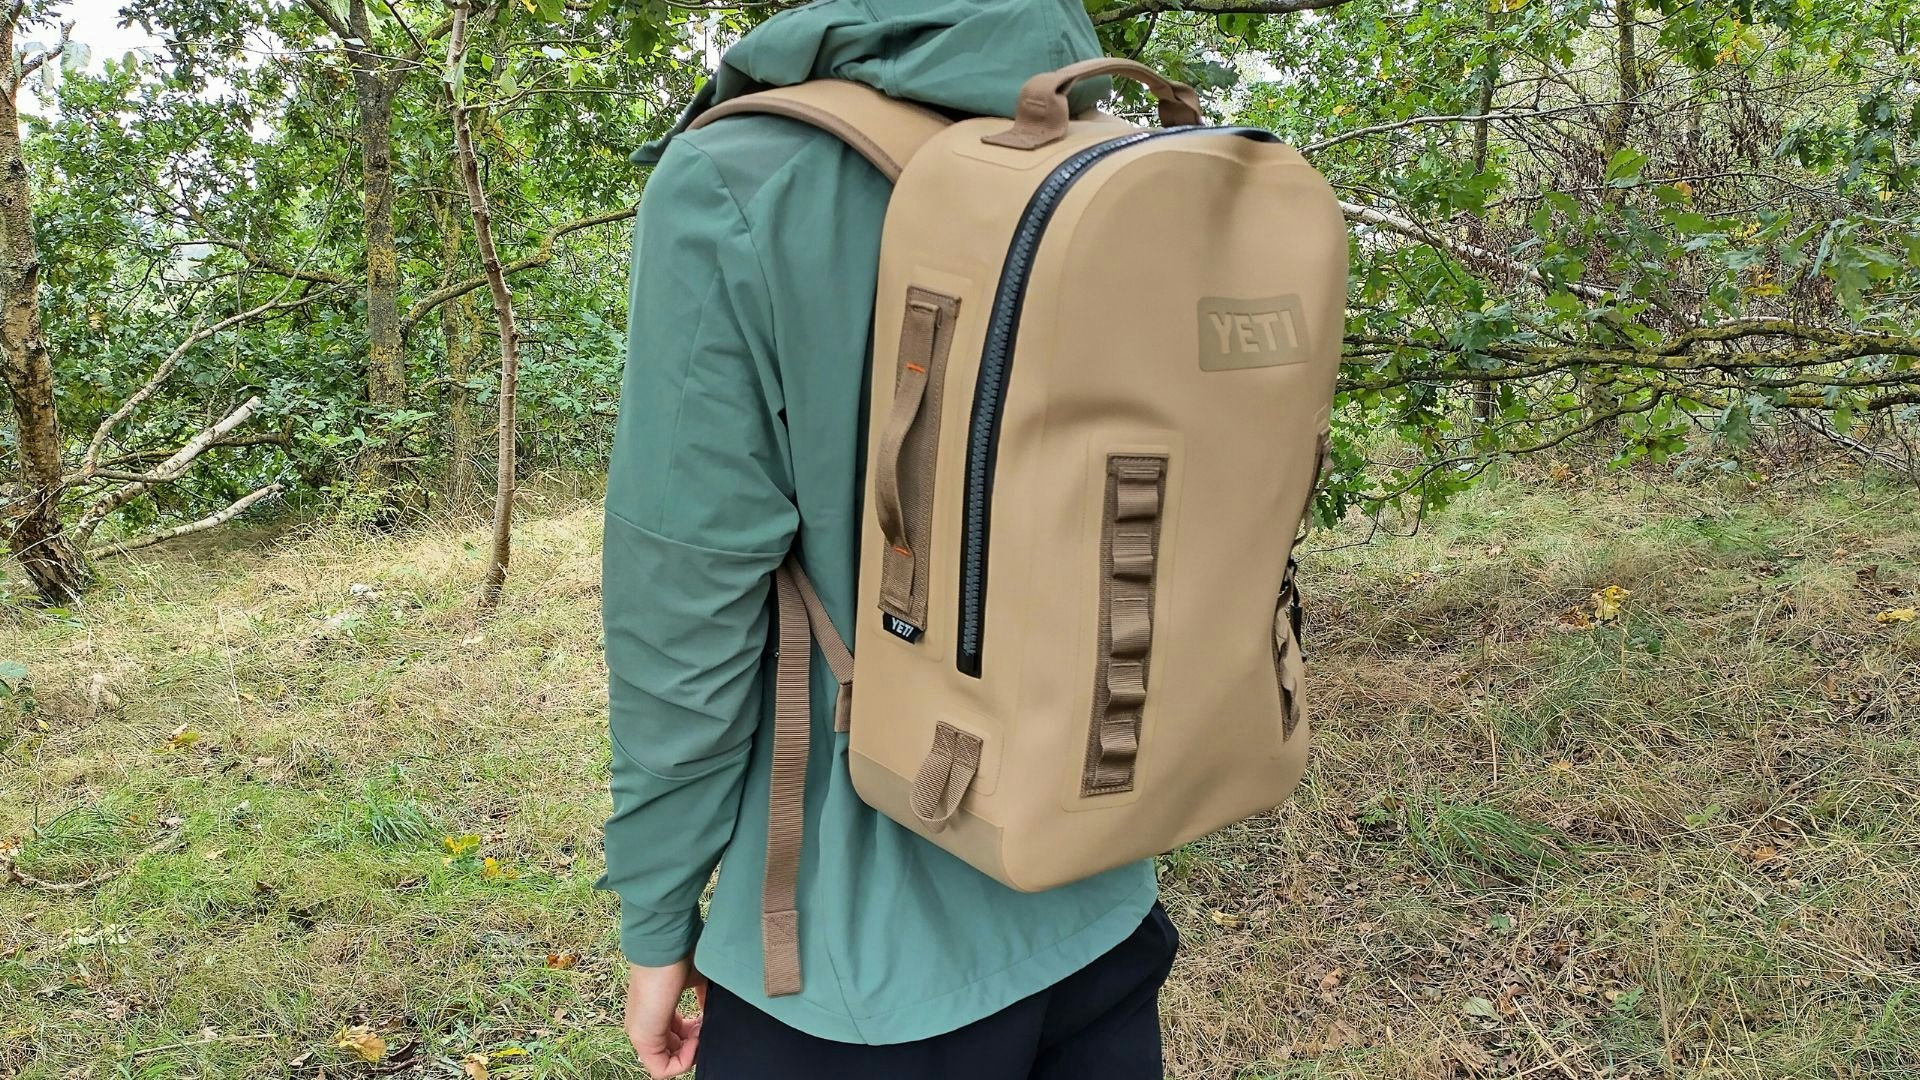 https://images.bauerhosting.com/affiliates/sites/2/2023/11/YETI-Panga-28L-Waterproof-Backpack-07.jpg?ar=16%3A9&fit=crop&crop=top&auto=format&w=undefined&q=80